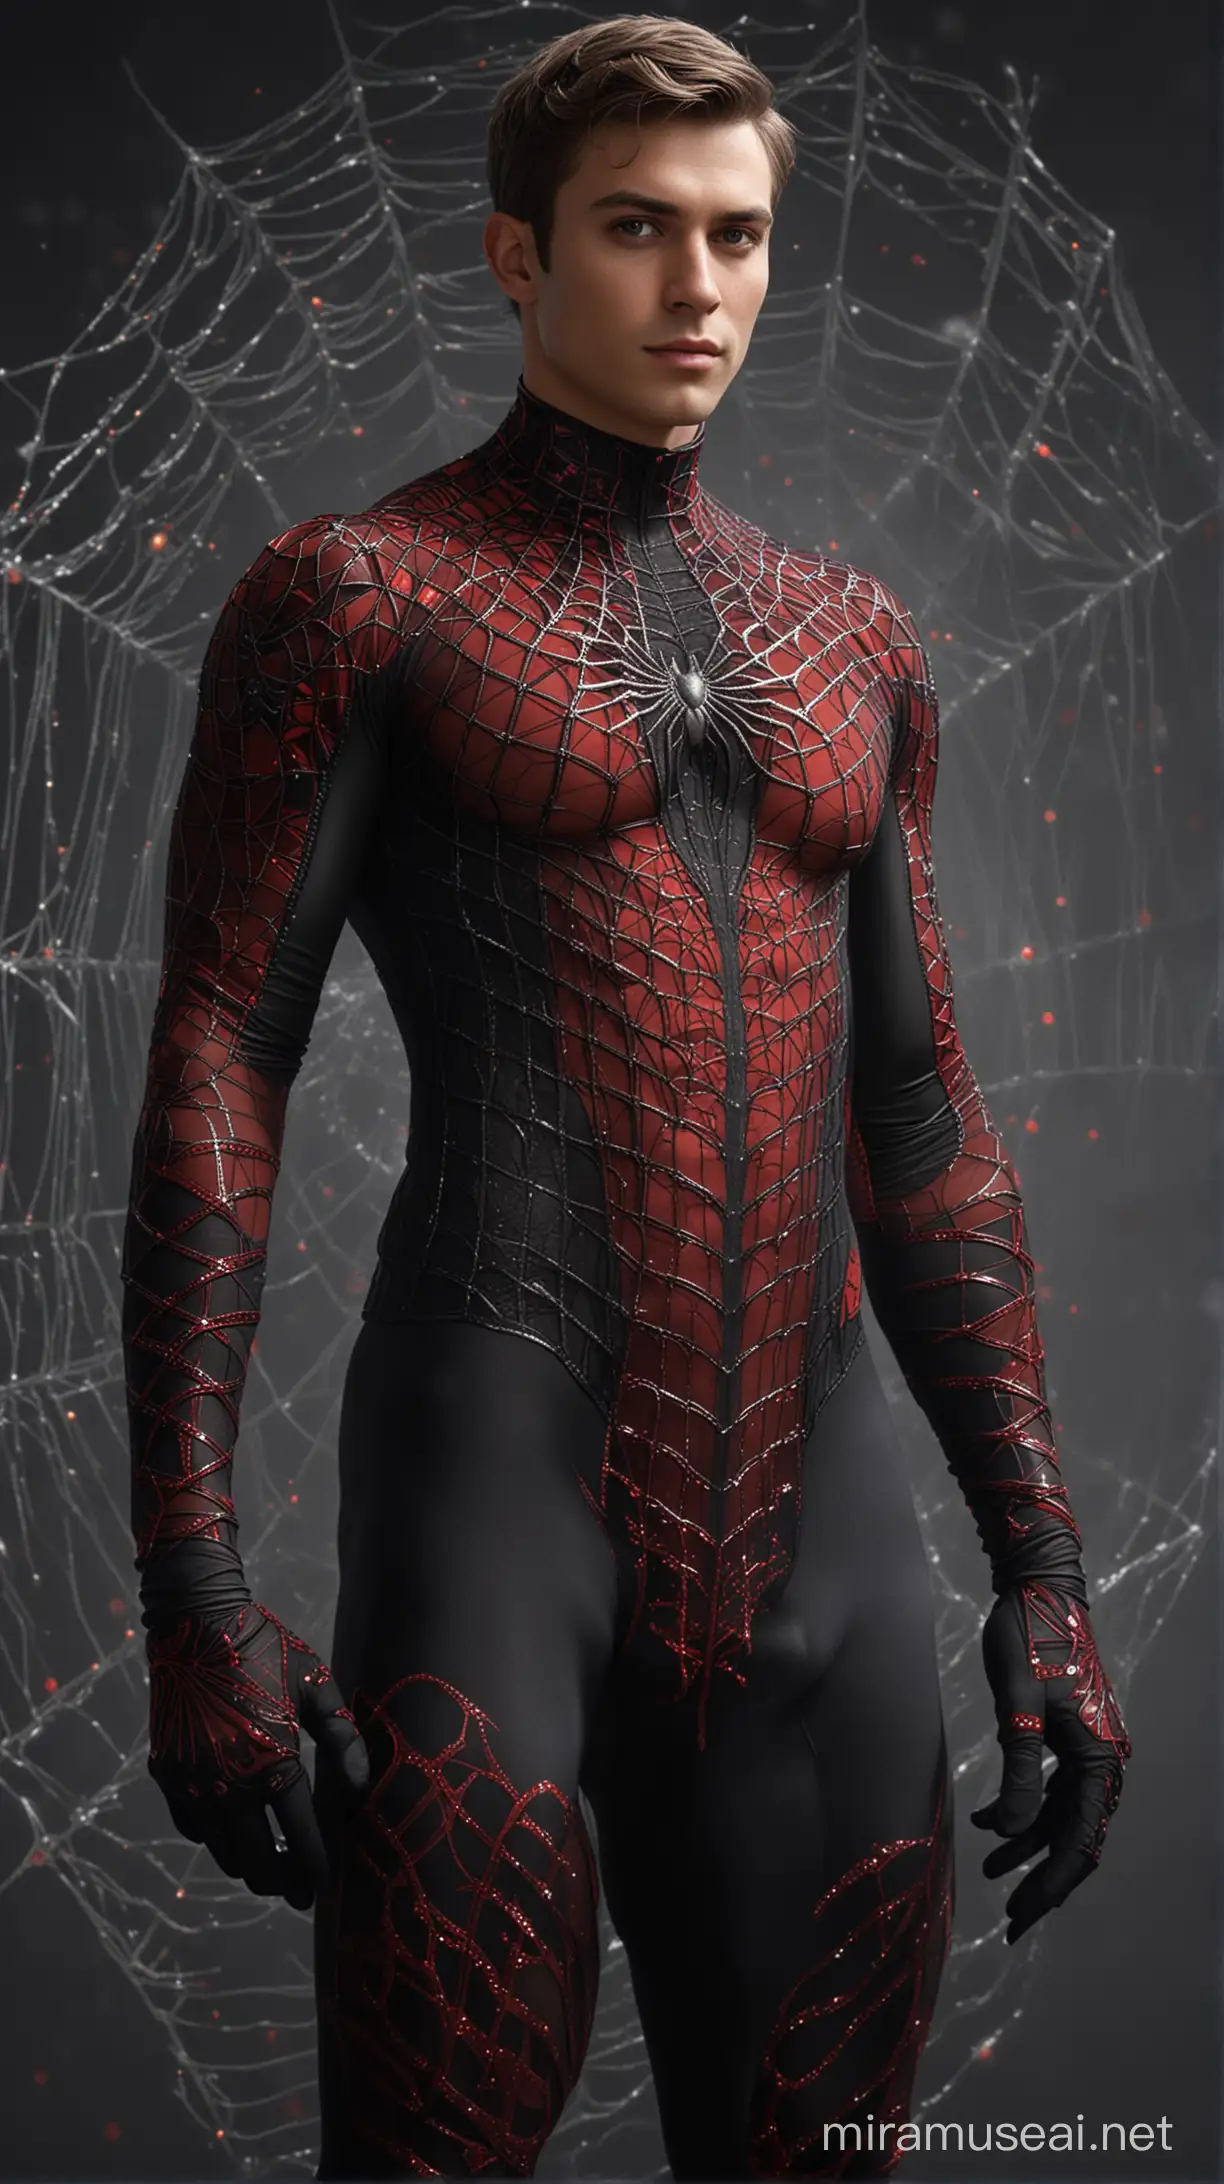  Full full body photorealistic ultra realism high definition aesthetic stabilized diffusion picture of handsome hunky fractal clean shaven  Zayne as celestial Arach, wearing black and red spider web filigree sparkling biomorphic transparent overall tight fit spandex and gloves.. standing in with hand on the hips.